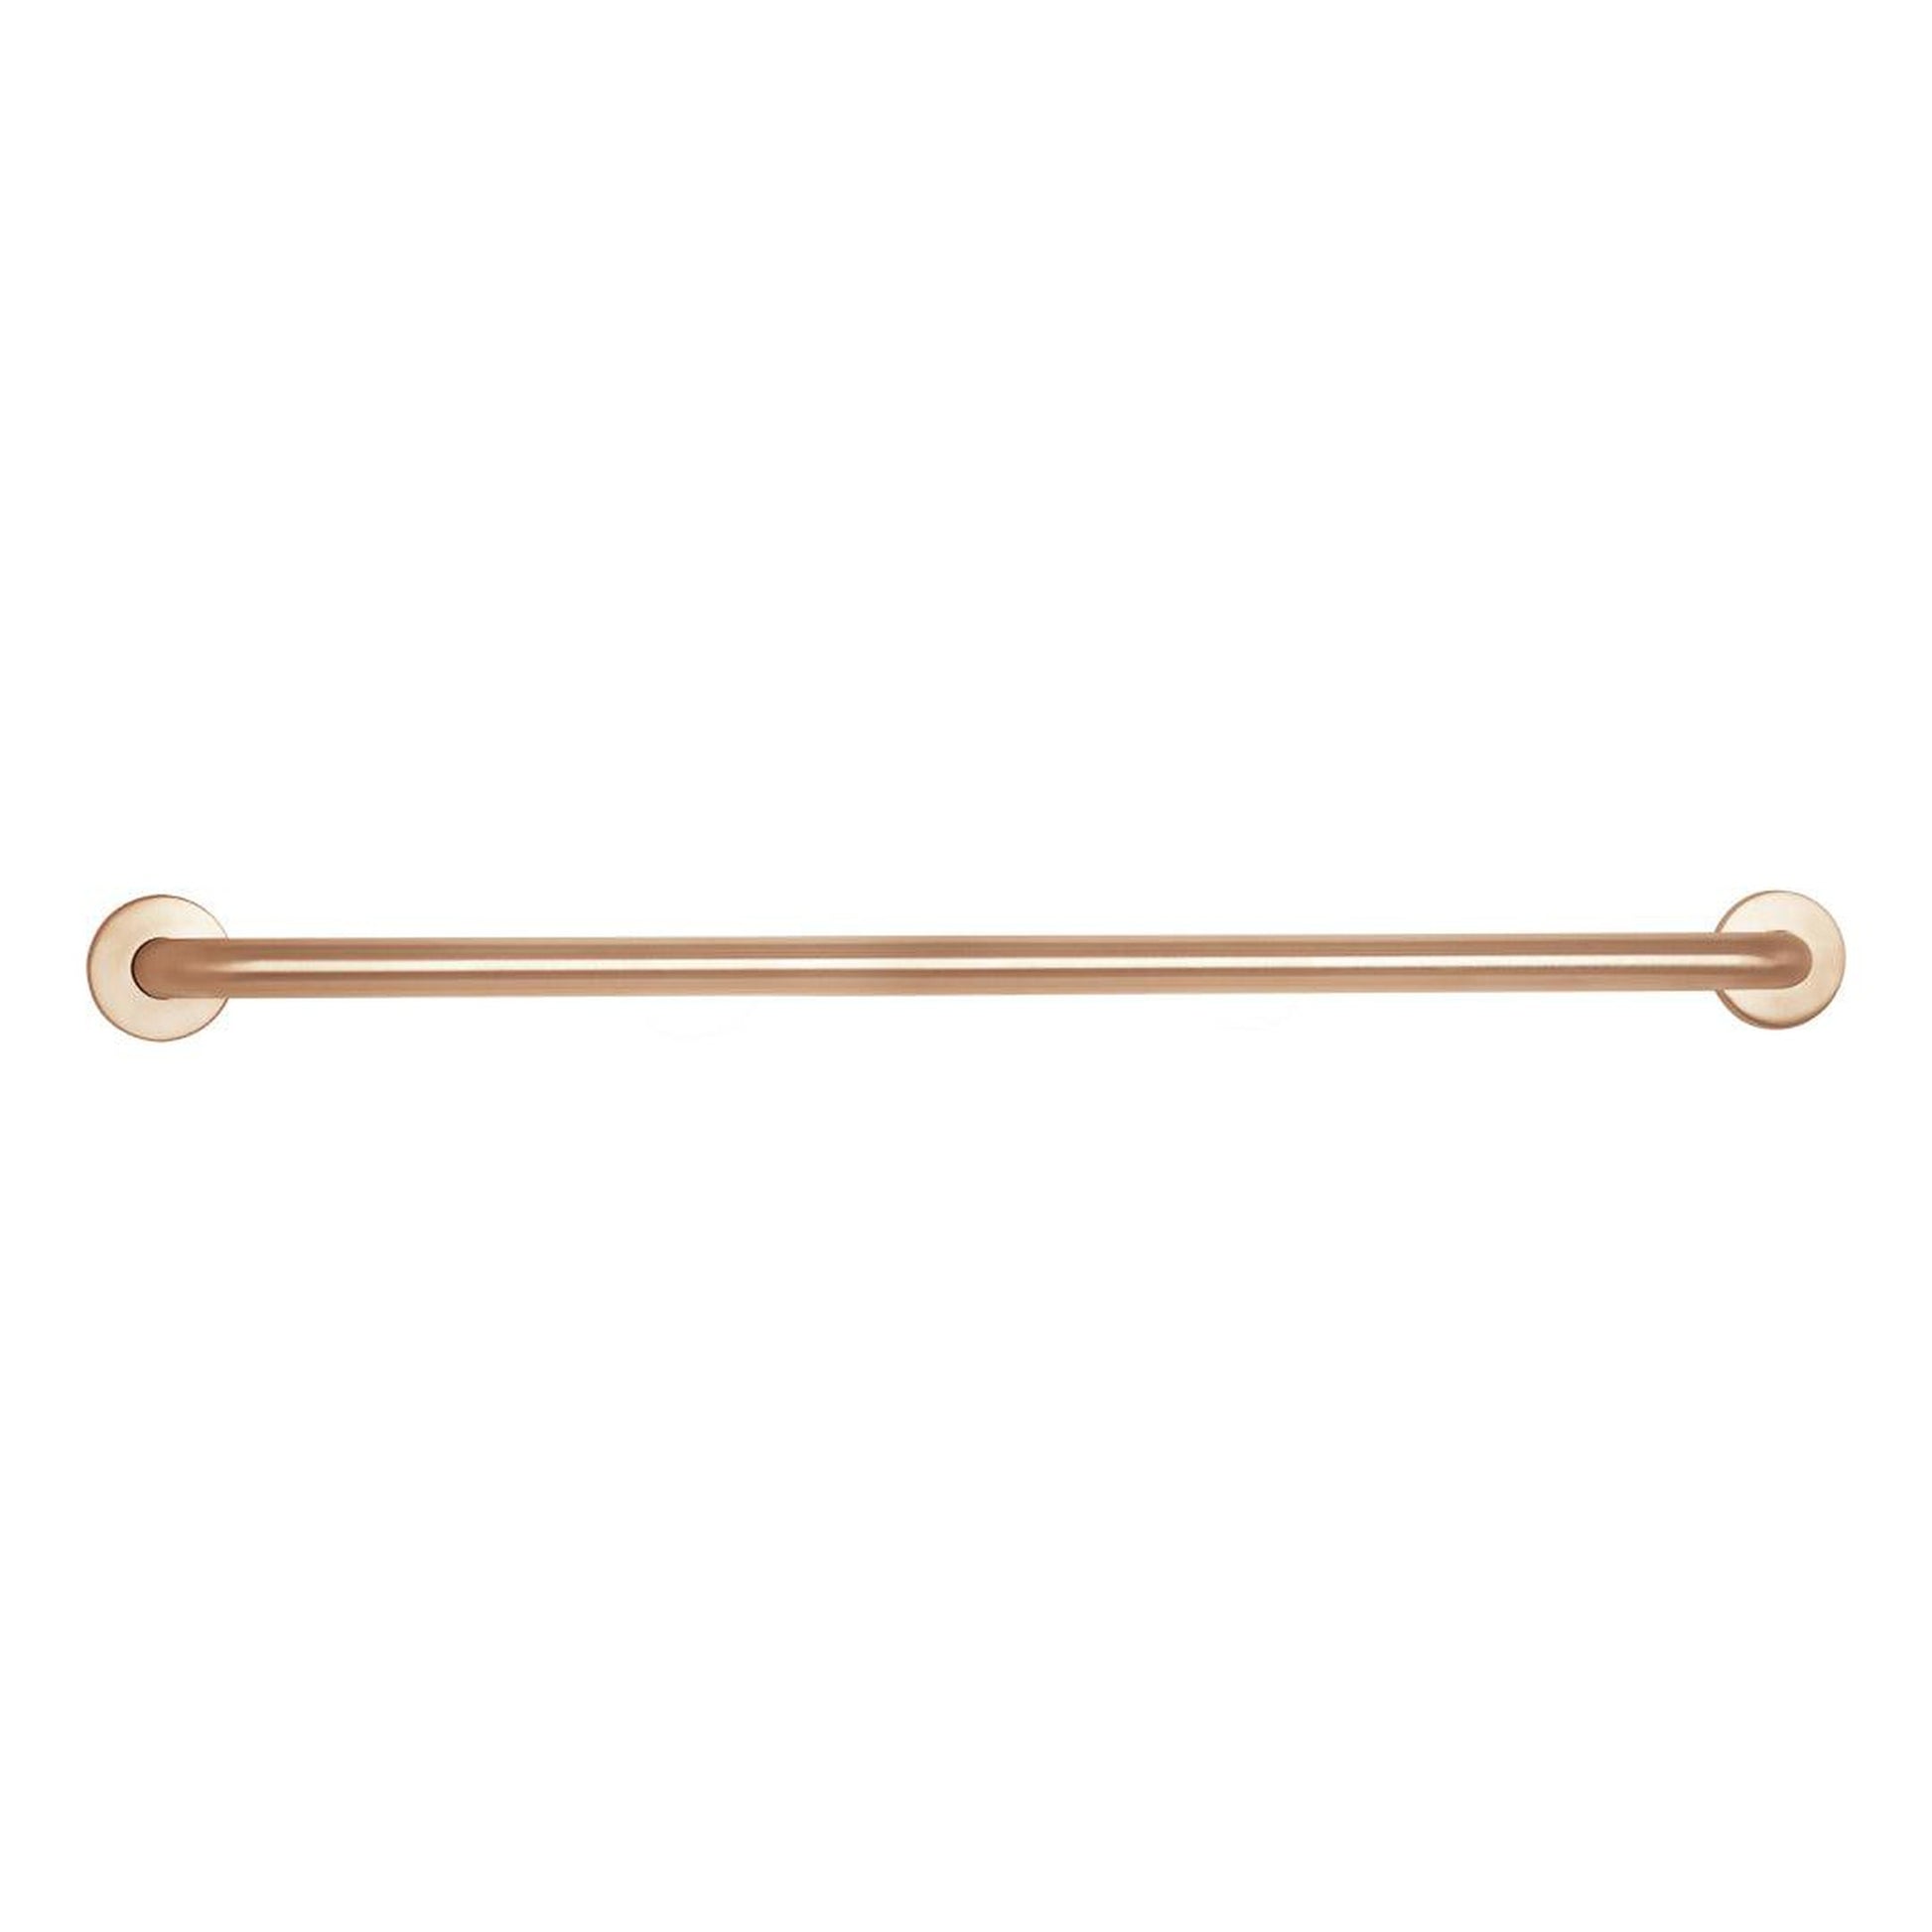 Seachrome Signature Series CuVerro 42" Antimicrobial Copper Alloy 1.5" Bar Diameter Concealed Flange Straight Grab Bar